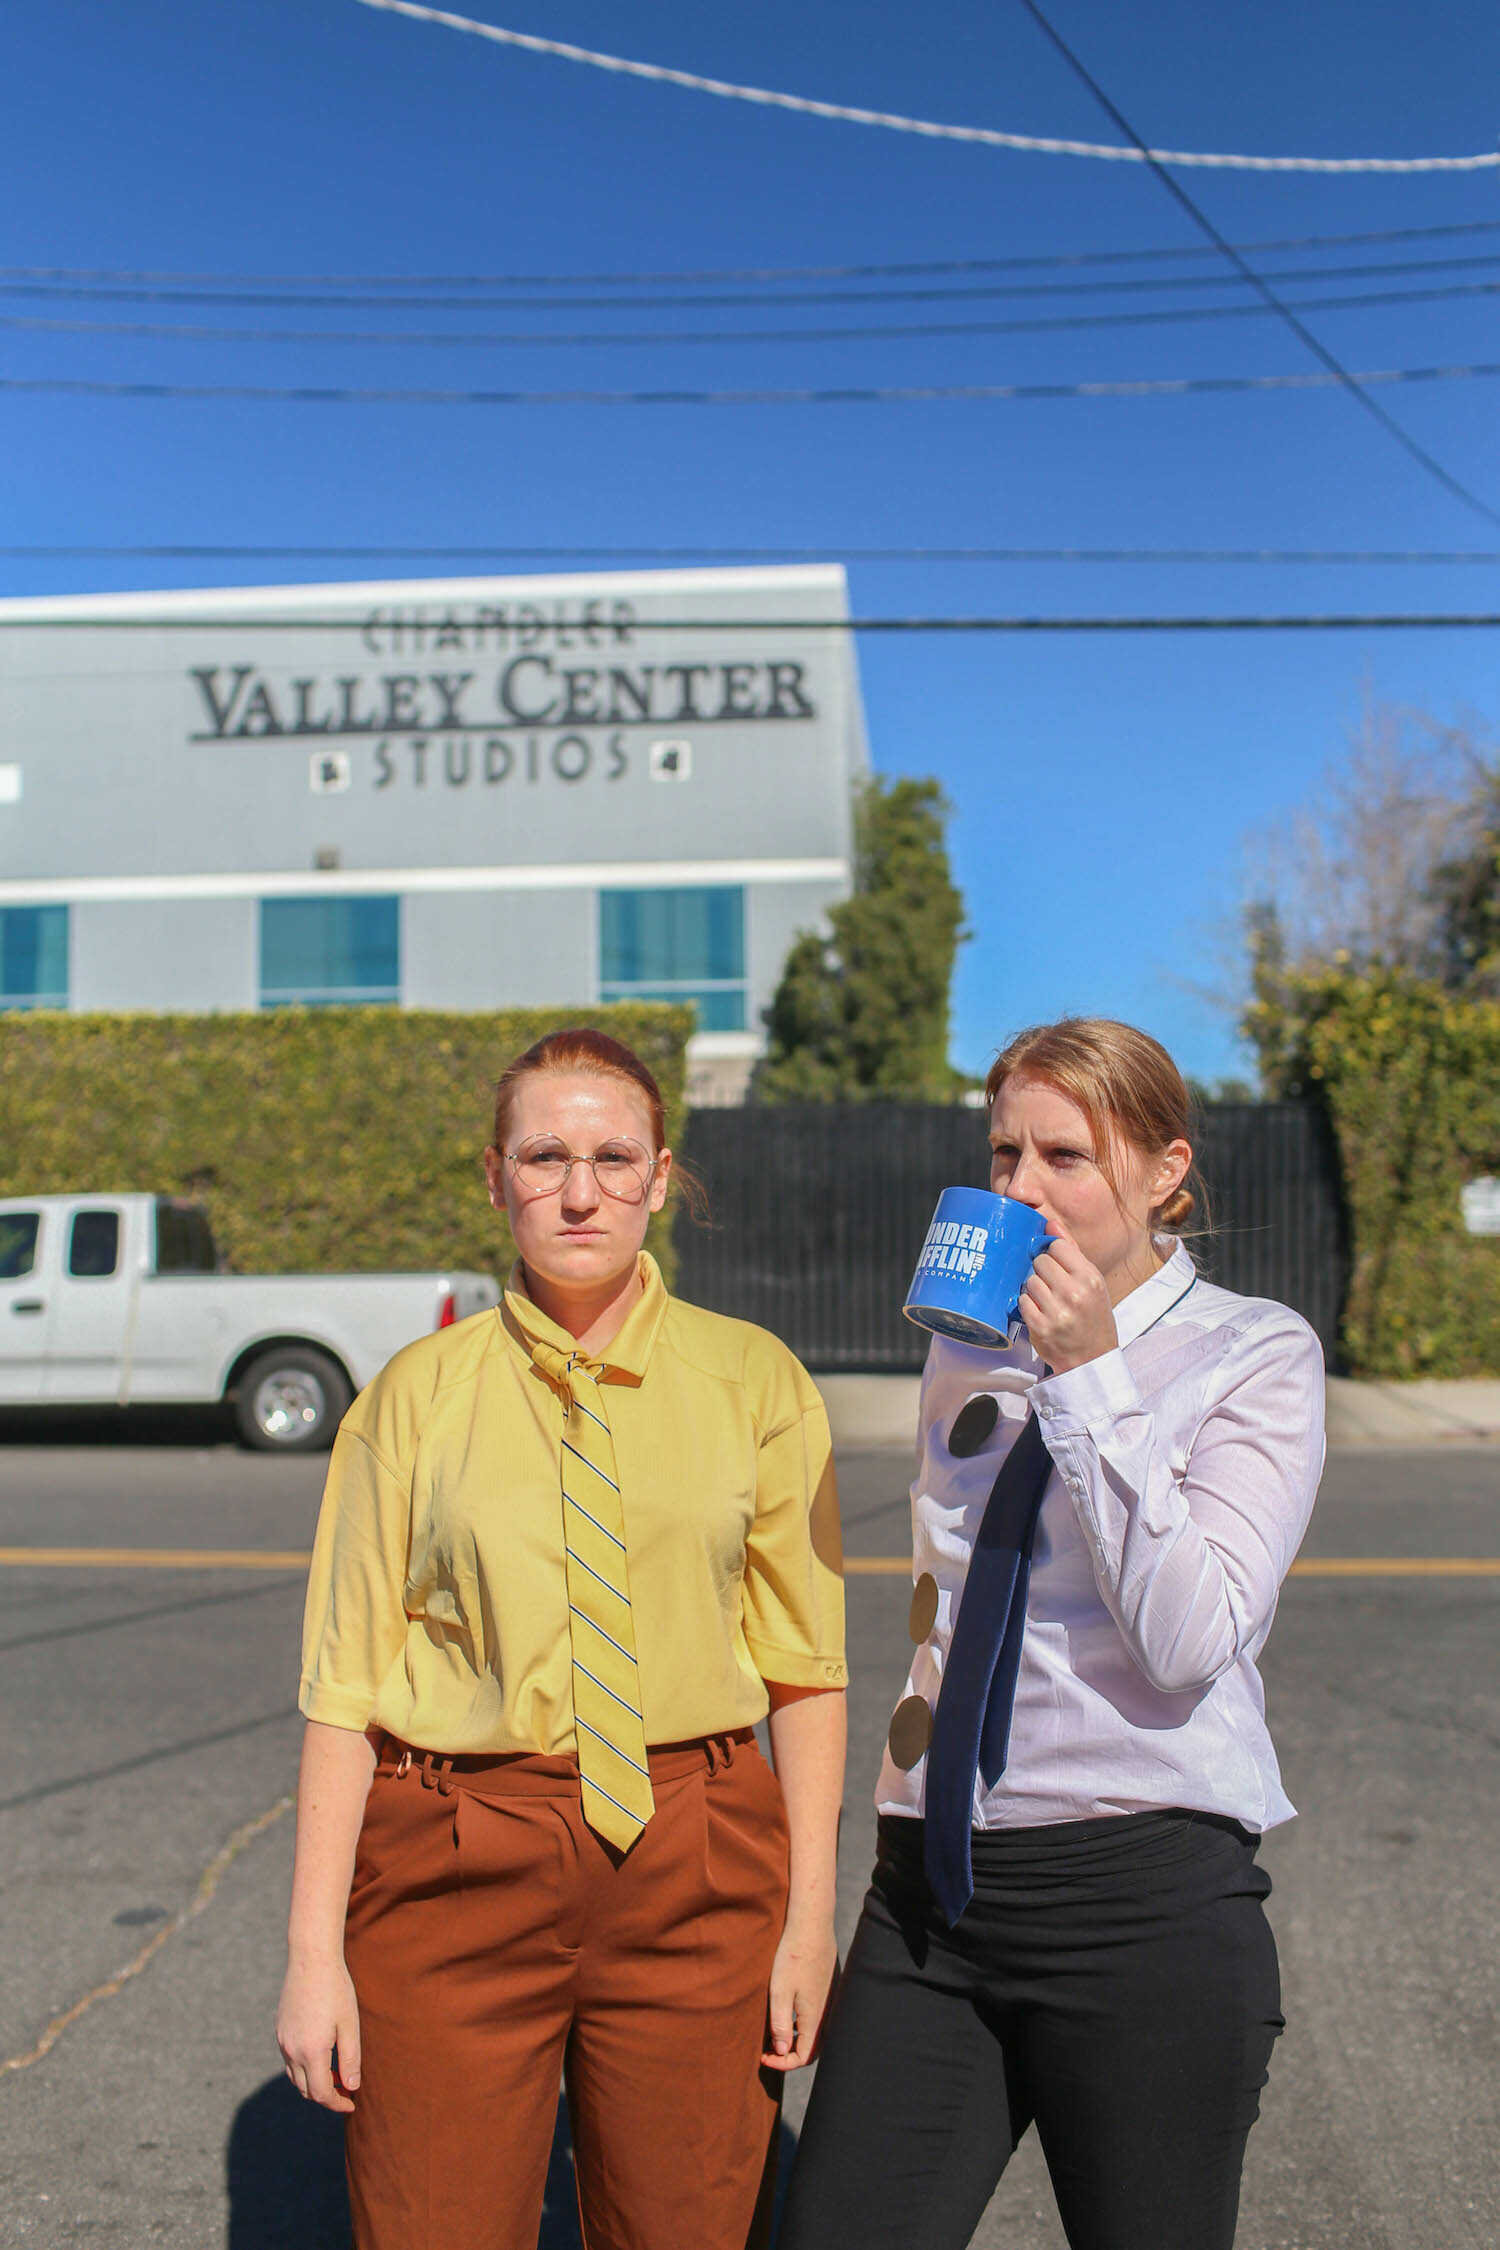 Kara dressed as Dwight Schrute and me dressed as Jim Halpert in front of the Dunder Mifflin office building in Panorama City.